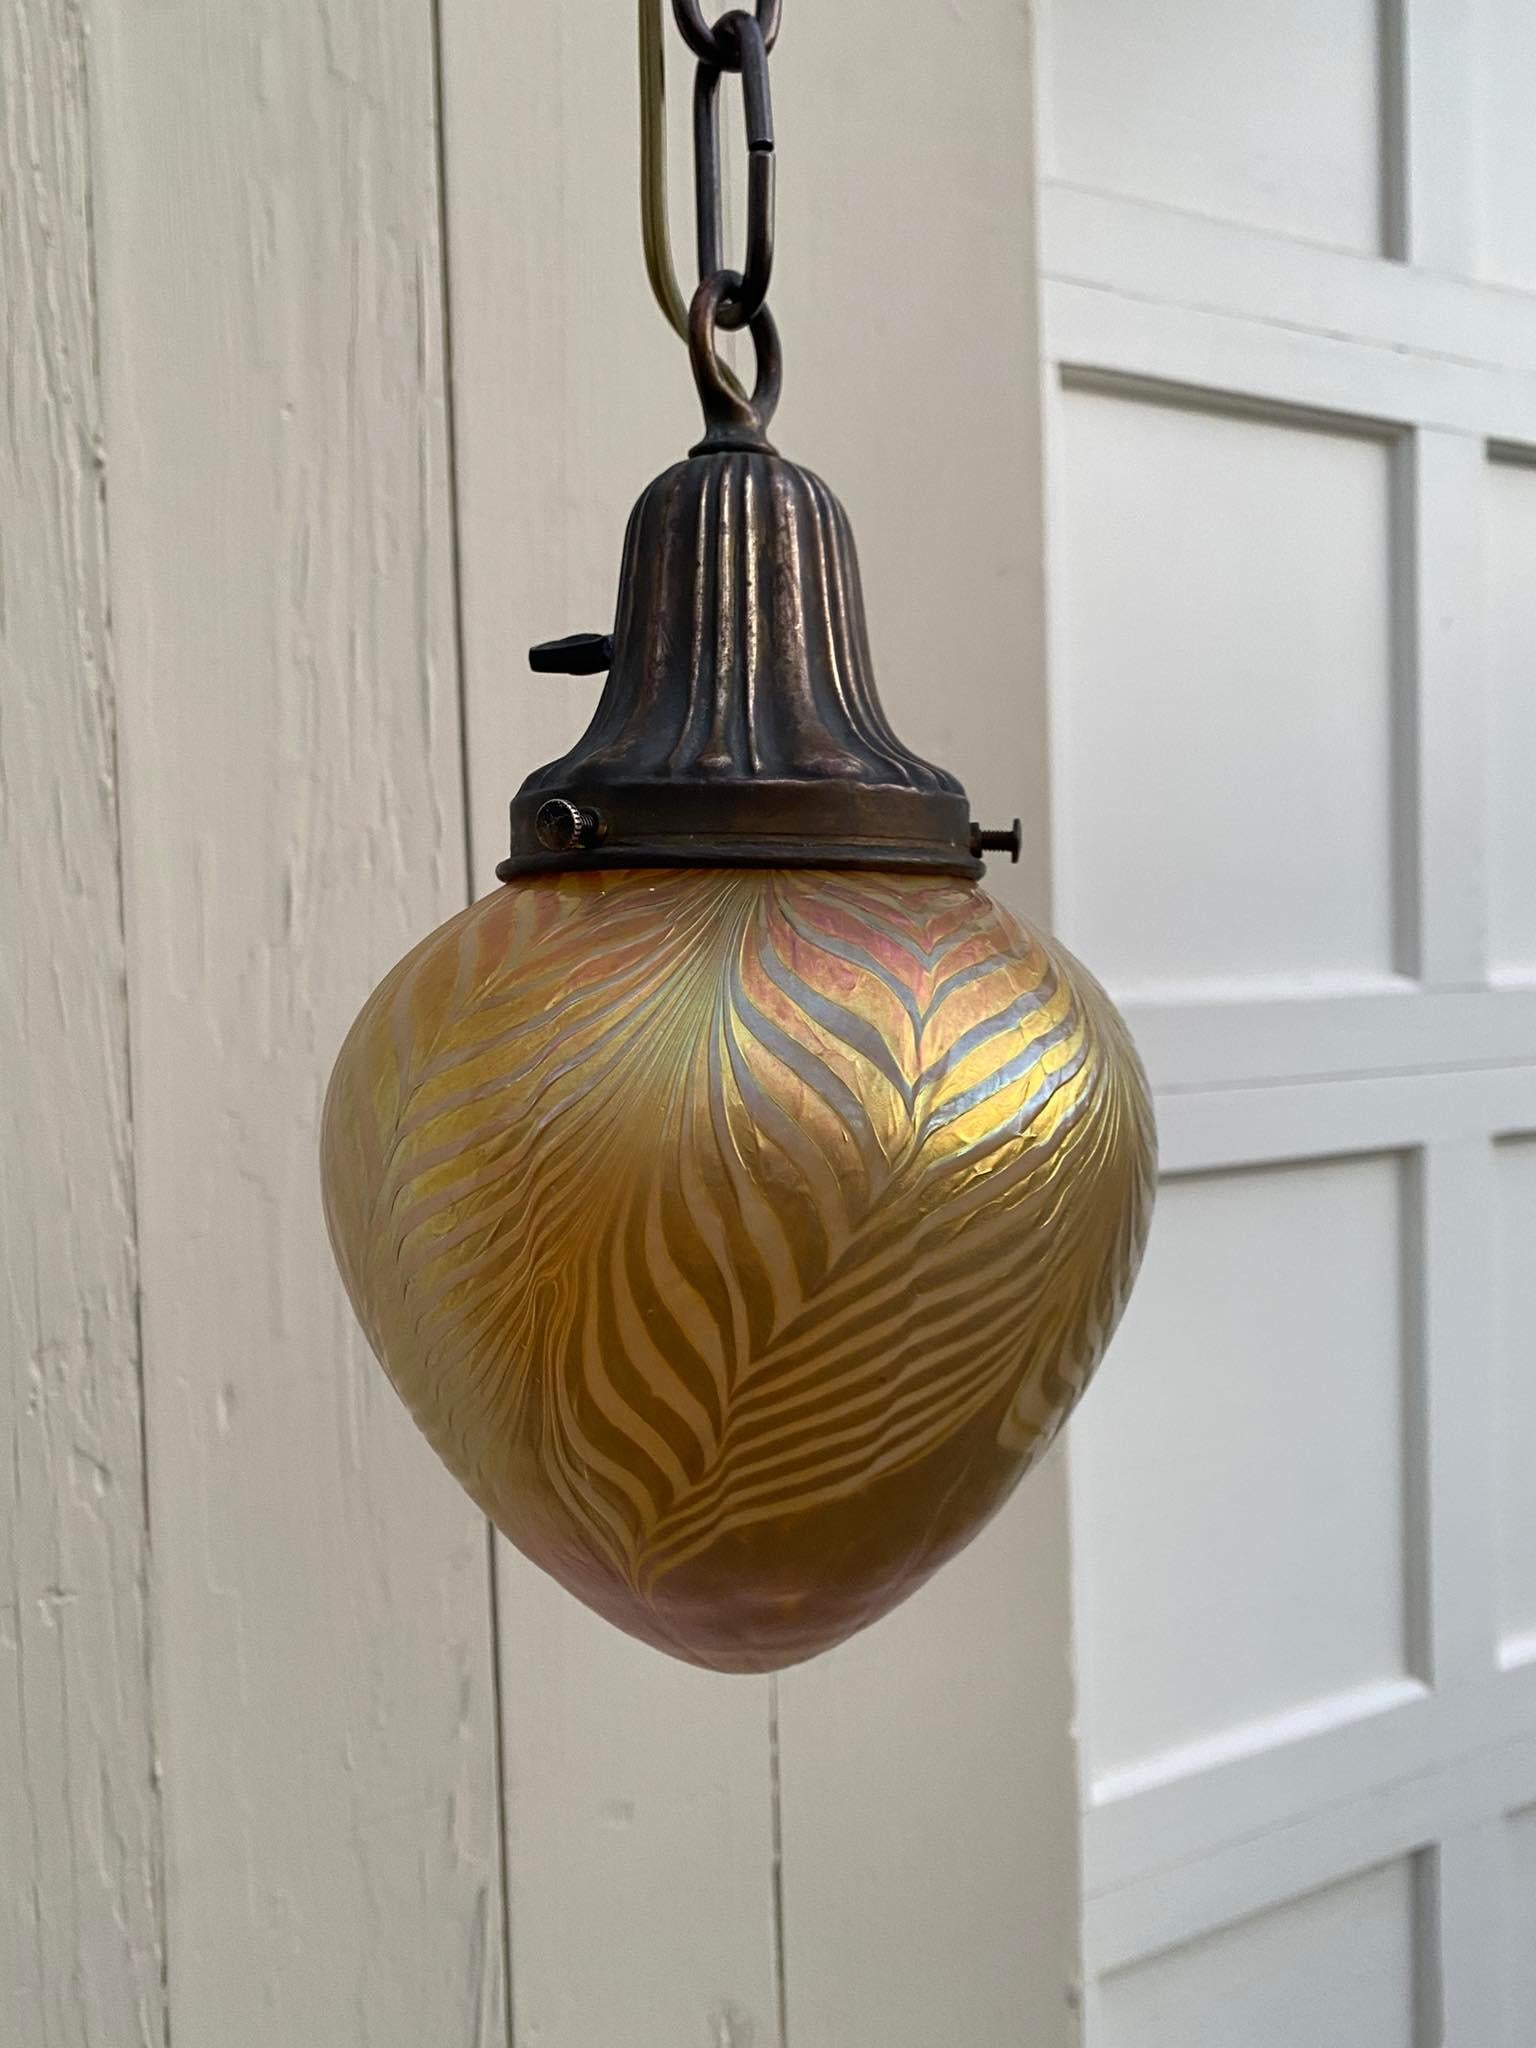 This is an amazing art glass shade produced by world renowned glass blowers Lundberg Studios in Davenport, California. It is attached to a vintage fully restored brass fixture, wired and ready to install. We ship everywhere. Follow us here for more